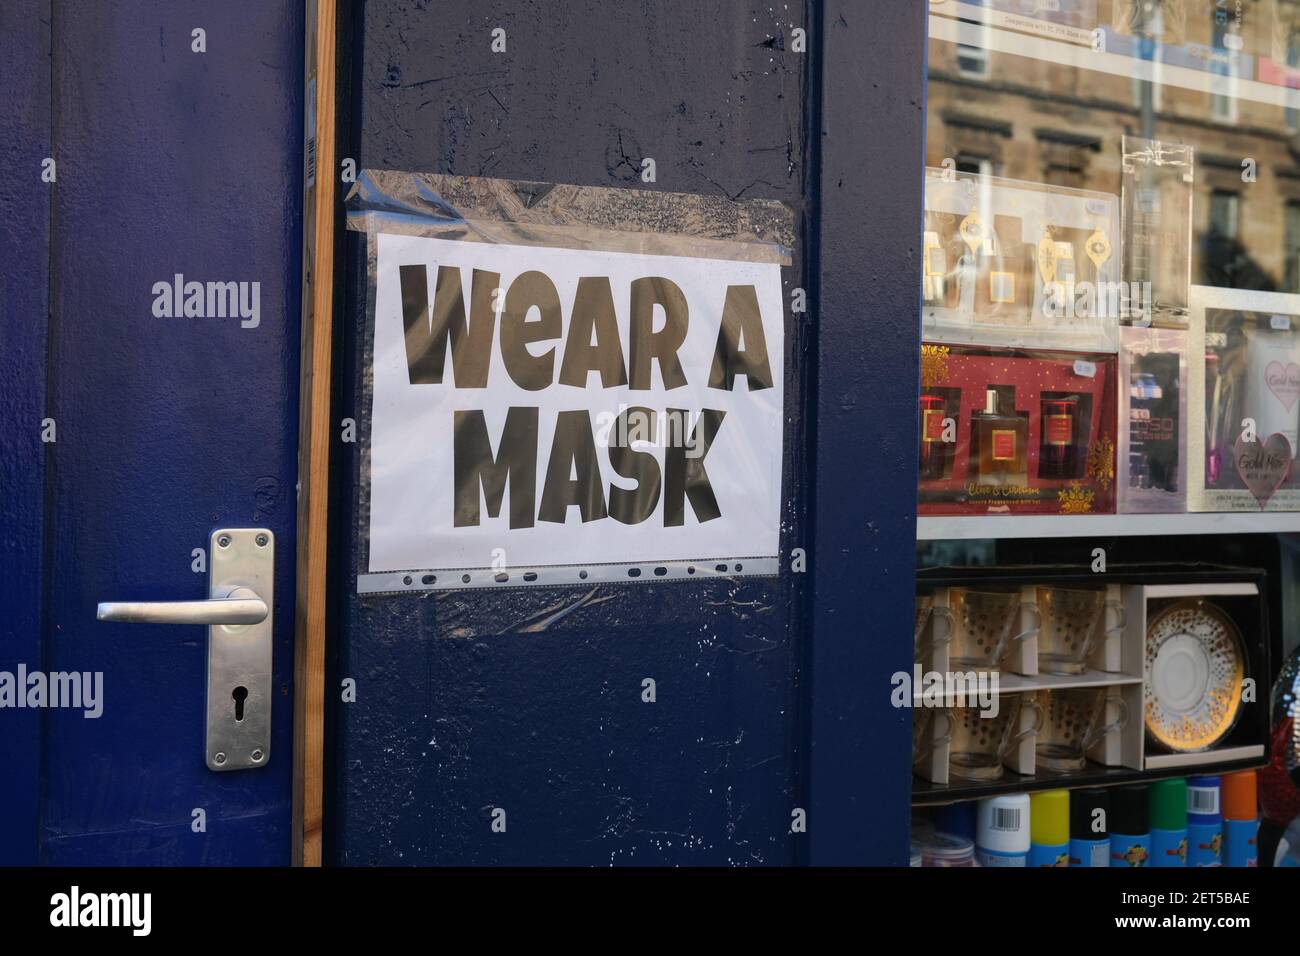 Glasgow, UK, on 1 March 2021. Signs on windows of shops and businesses directing people to maintain the safety protocols and to wear masks. Over 1.5 million people have now had their first Covid-19 CoronaVirus vaccination in Scotland. Photo credit: Jeremy Sutton-Hibbert/Alamy Live News. Stock Photo